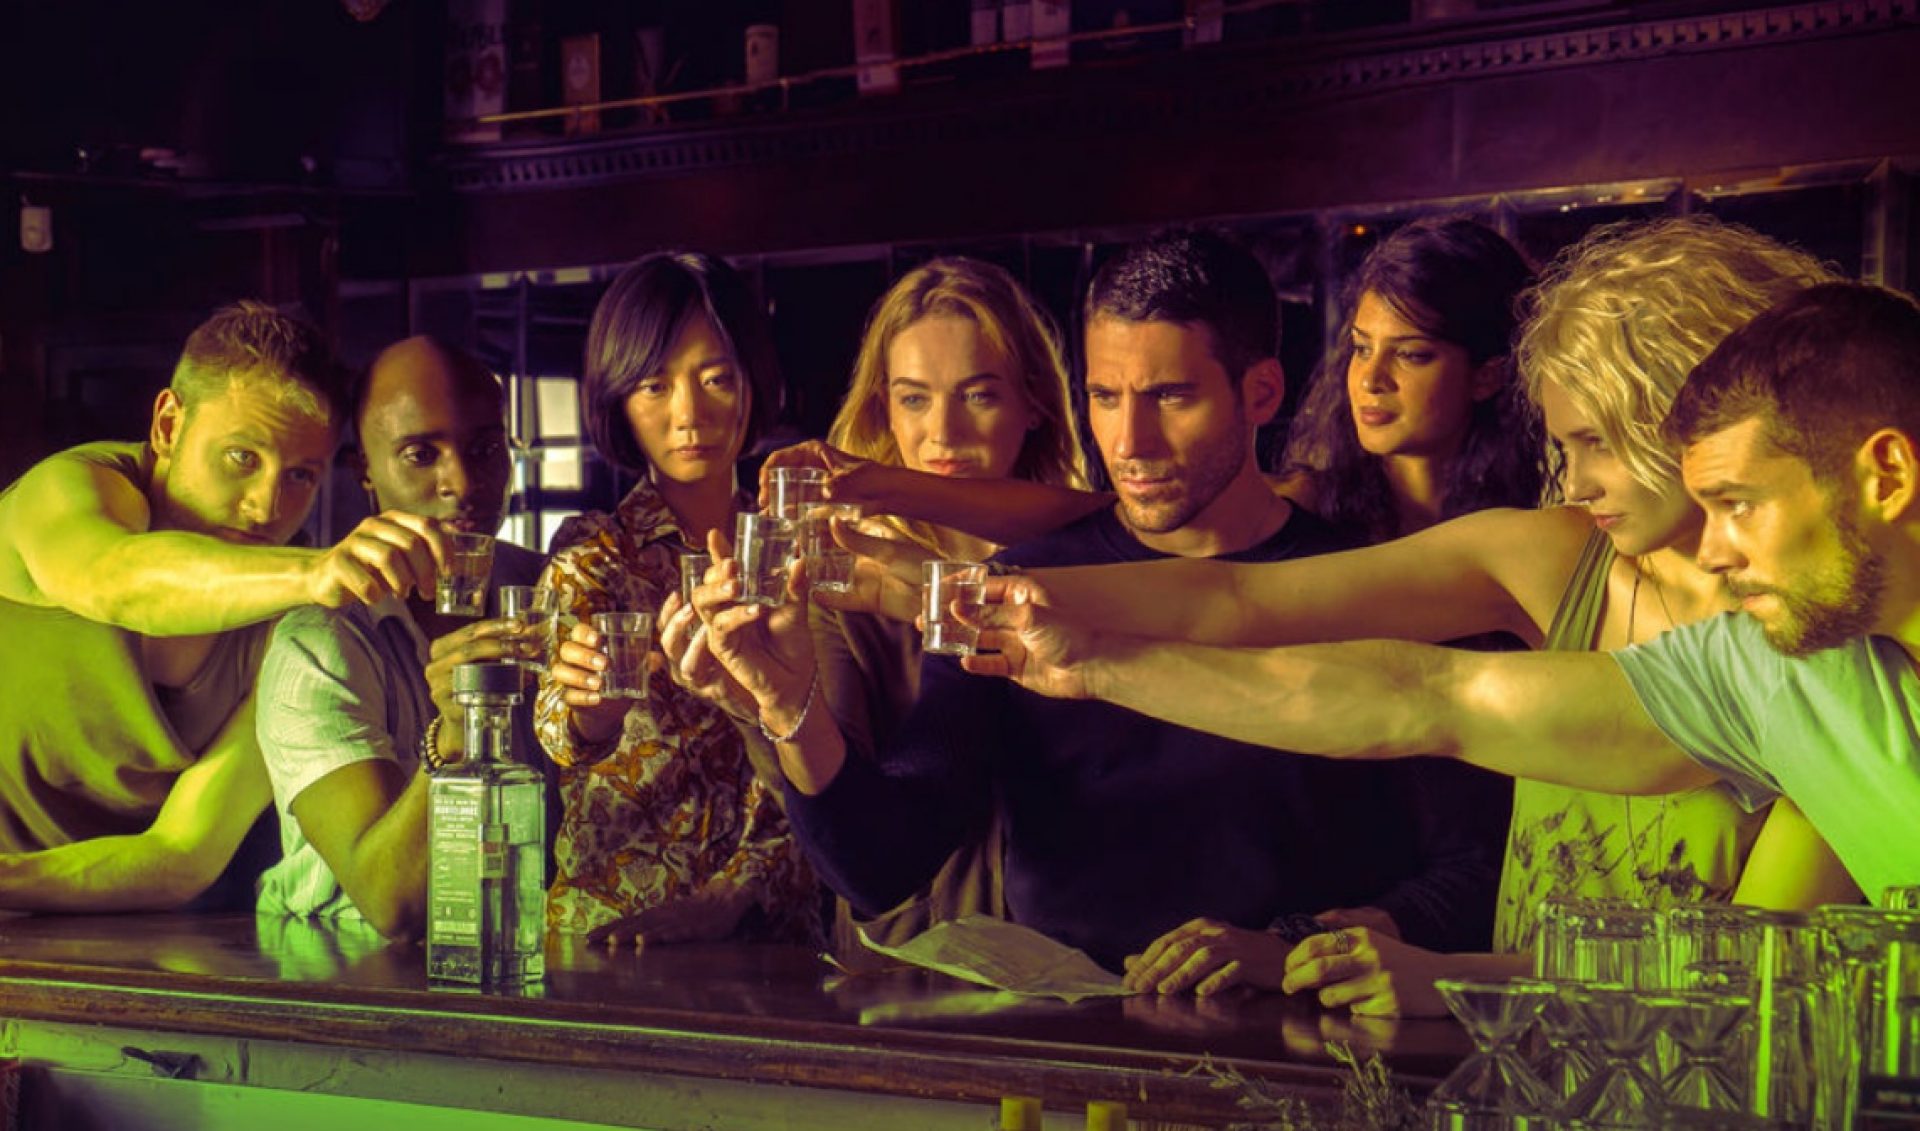 The World’s Third Most Visited Porn Site Wants To Give Canceled Netflix Series ‘Sense8’ A New Home